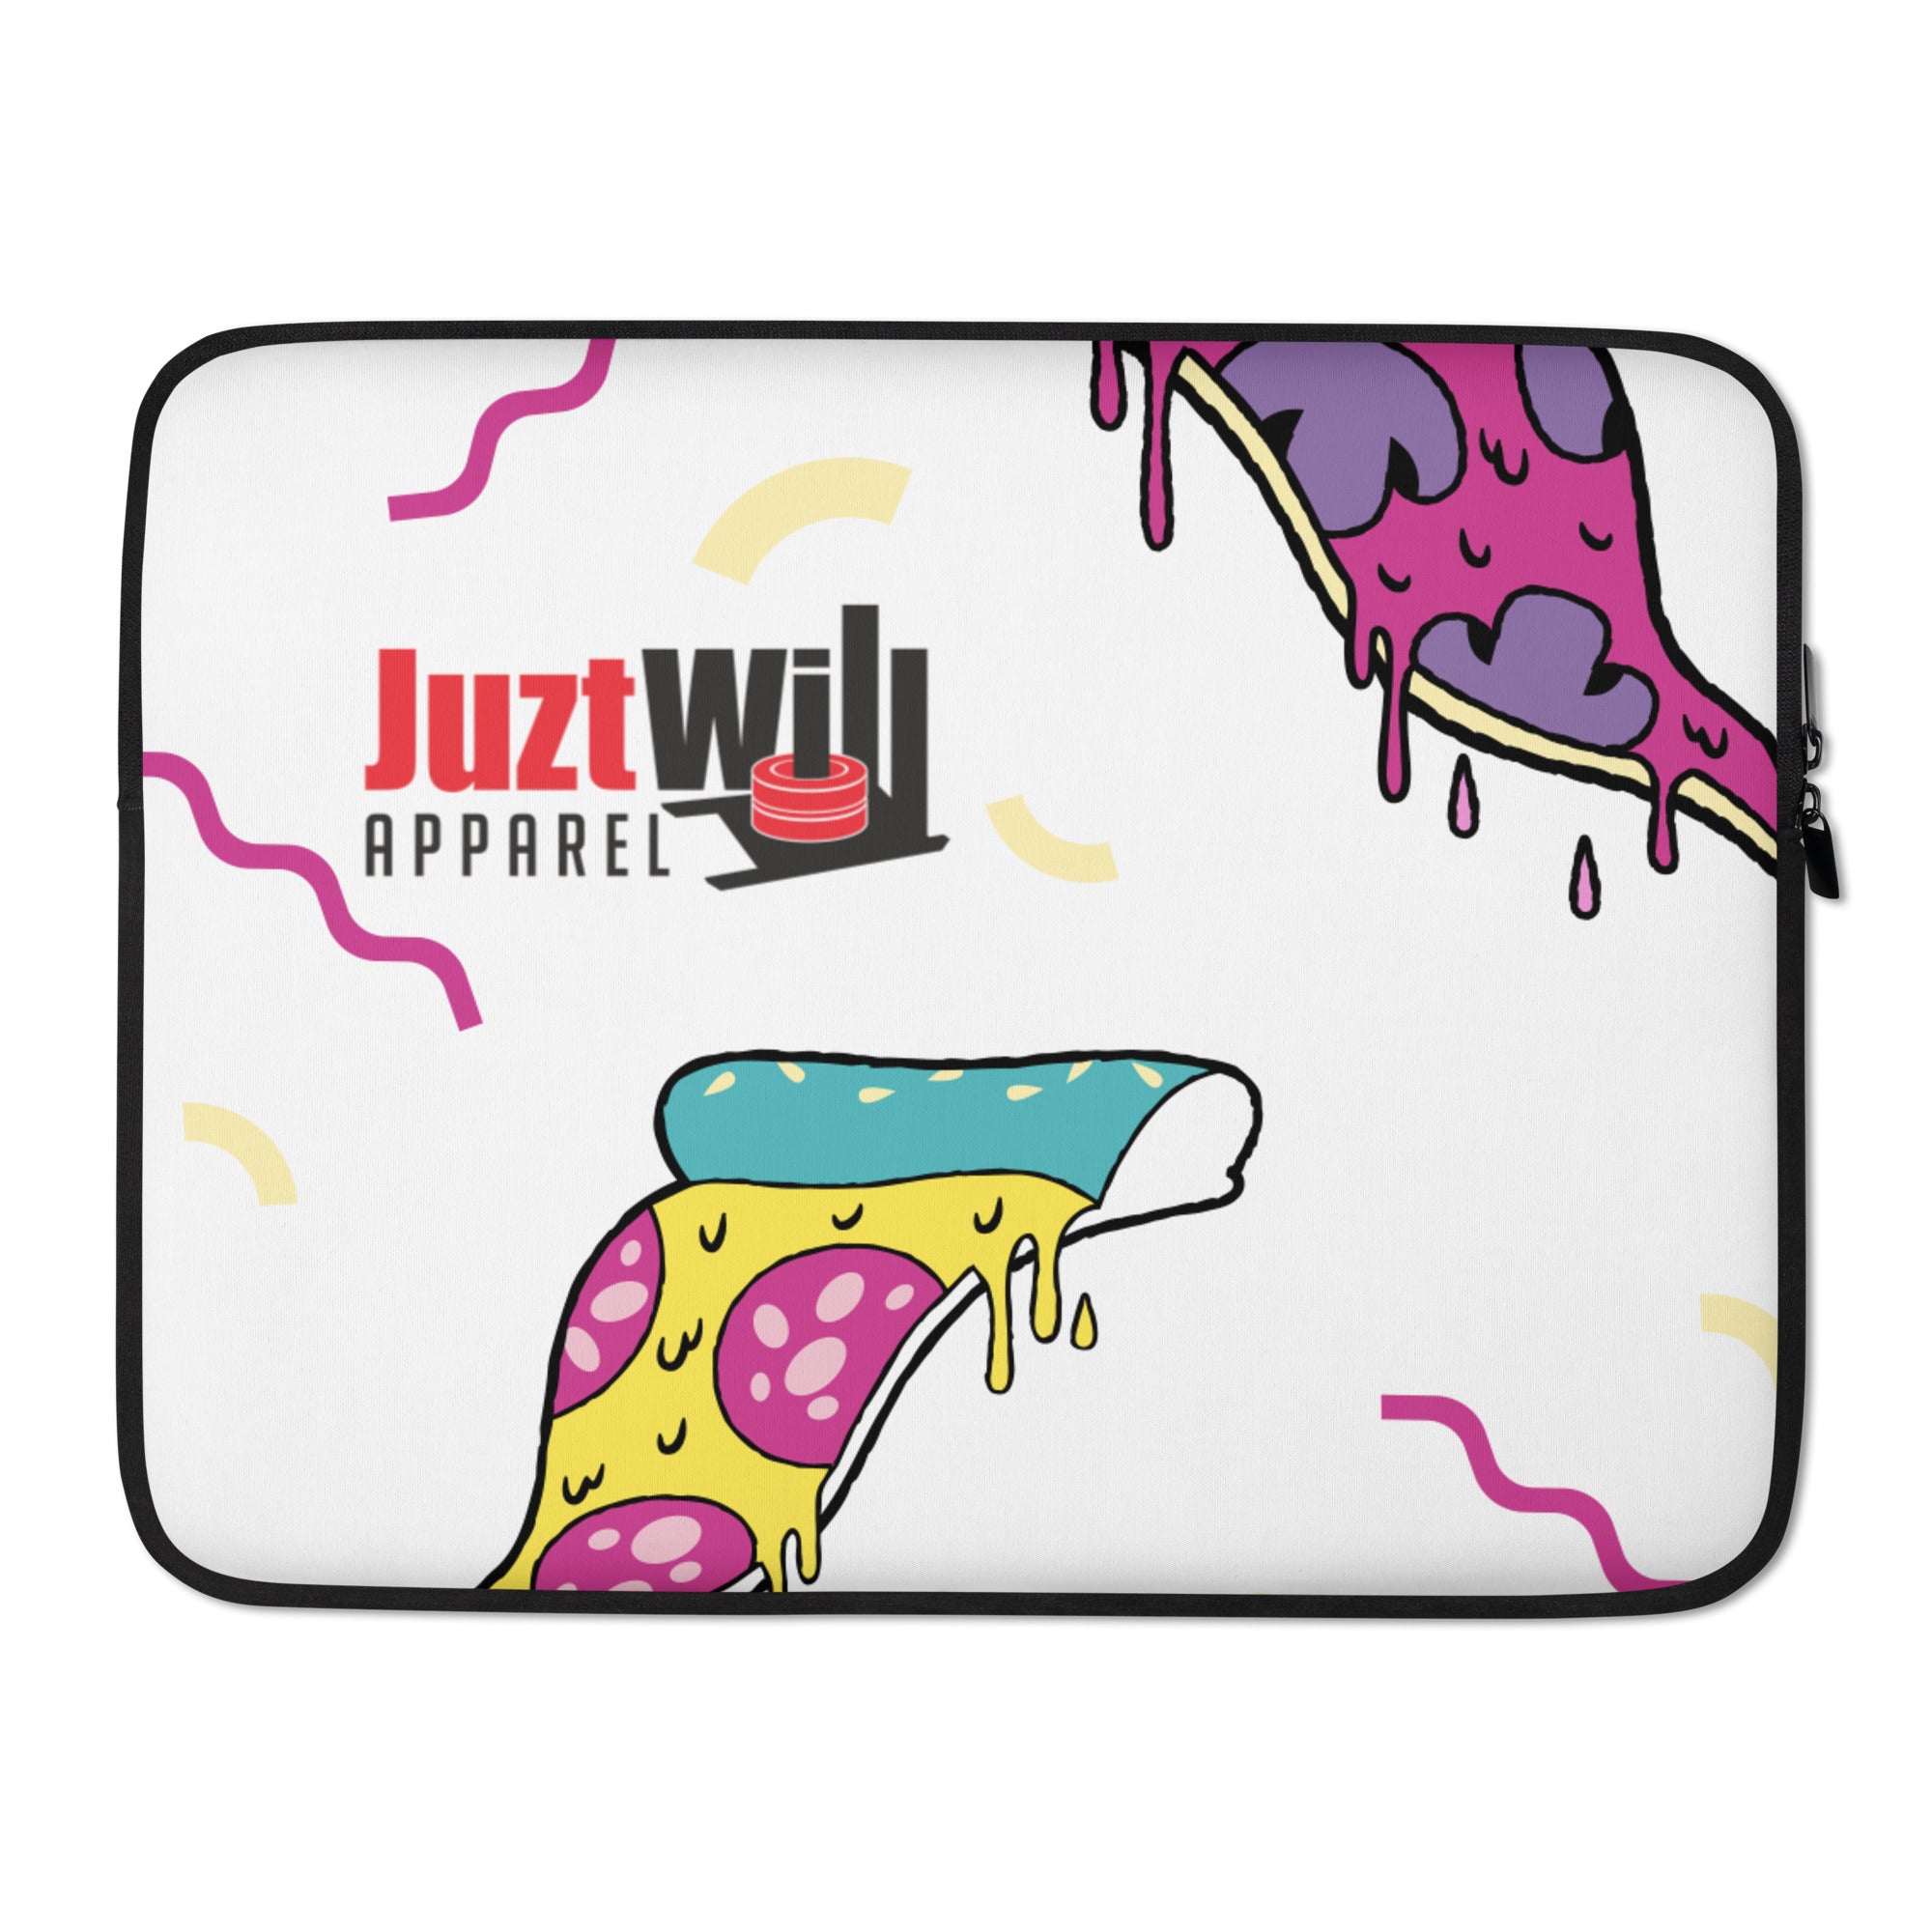 The Pizza Party Laptop Sleeve – Will Apparel Juzt